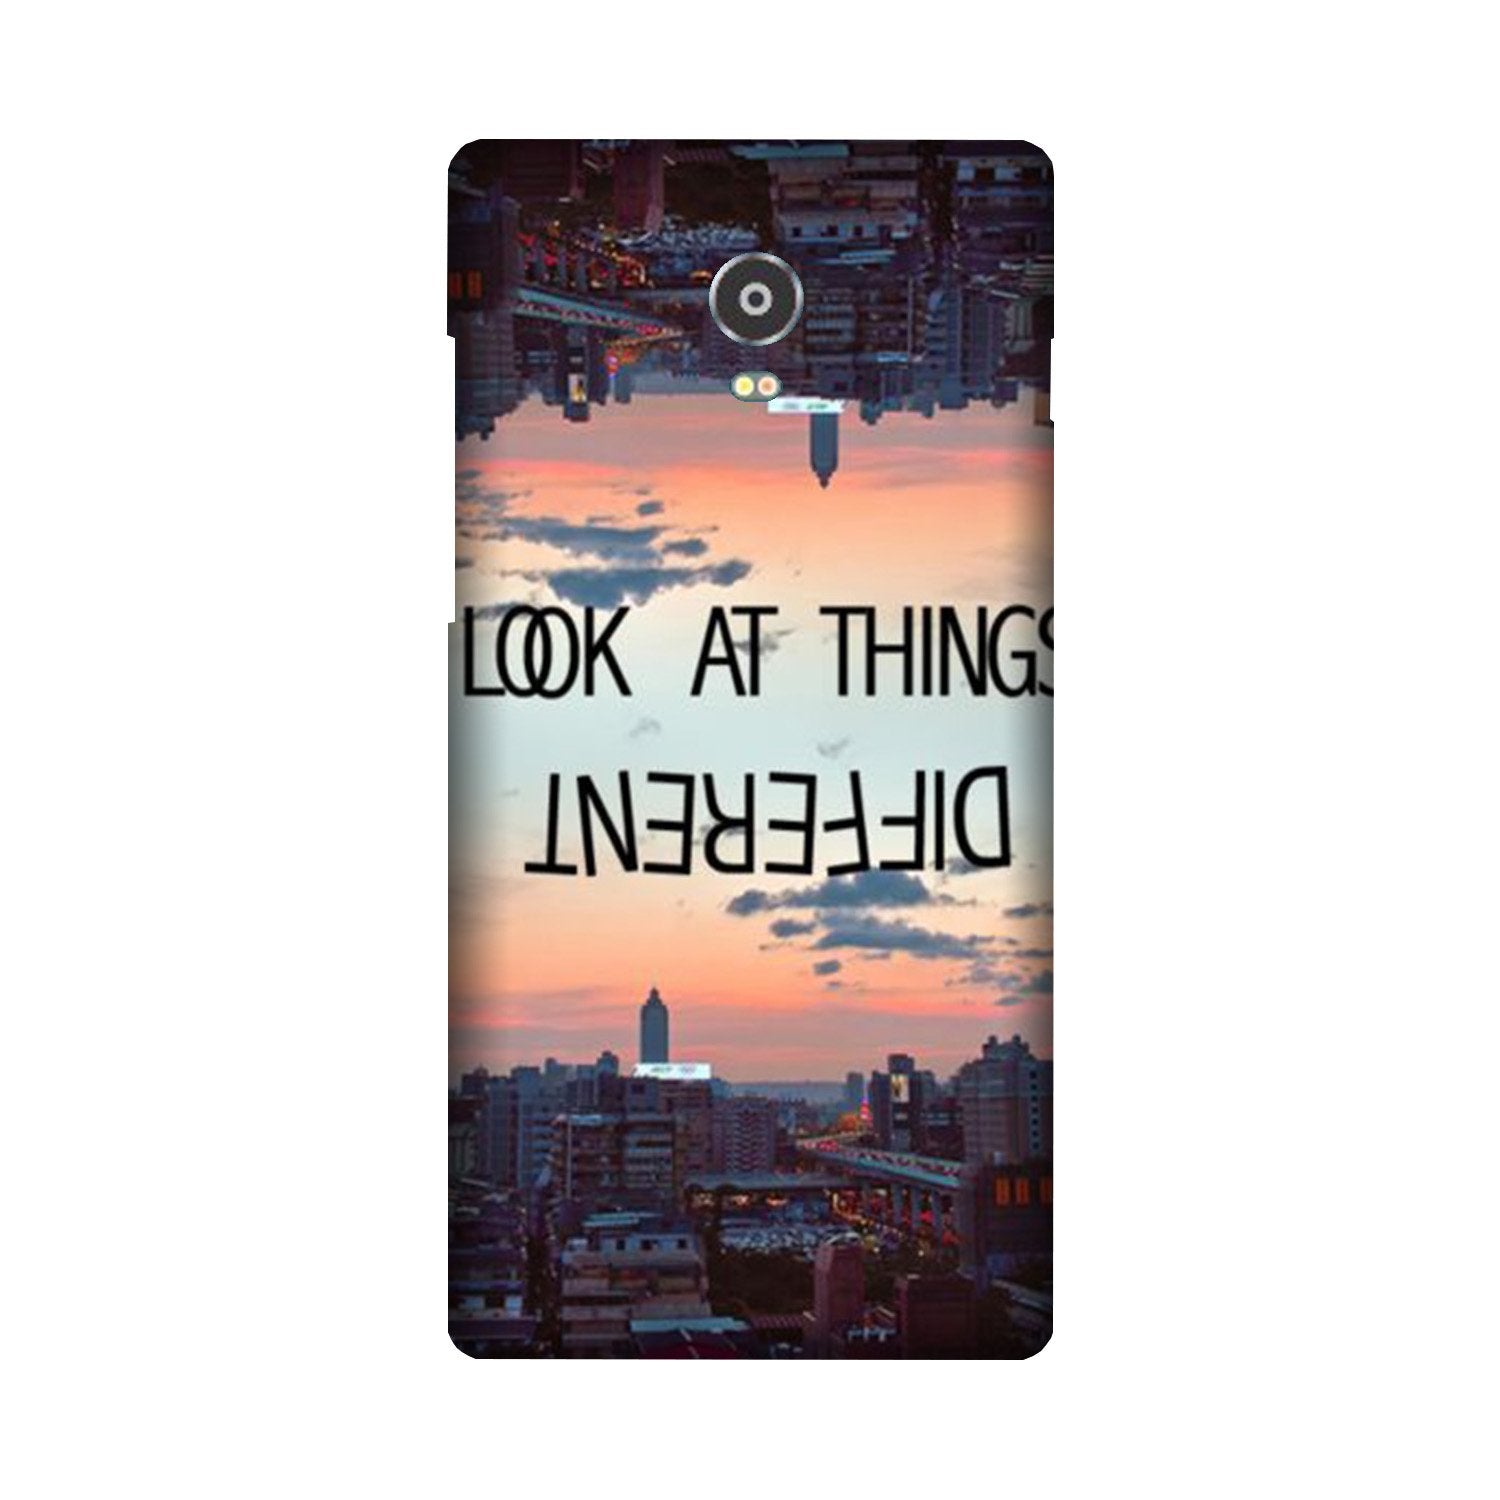 Look at things different Case for Lenovo Vibe P1